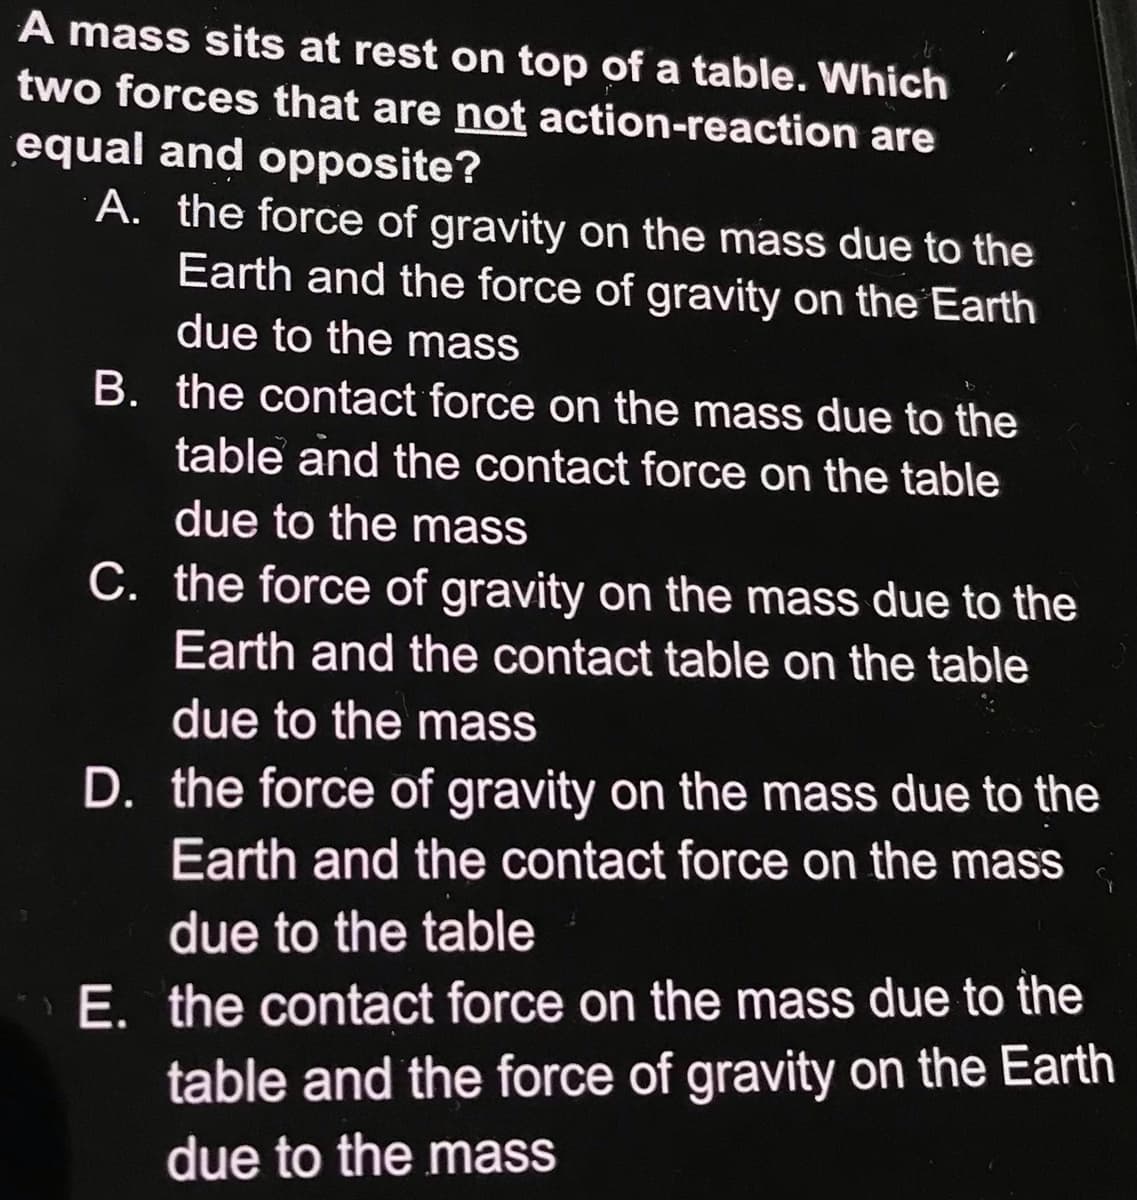 A mass sits at rest on top of a table. Which
two forces that are not action-reaction are
equal and opposite?
A. the force of gravity on the mass due to the
Earth and the force of gravity on the Earth
due to the mass
B. the contact force on the mass due to the
table and the contact force on the table
due to the mass
C. the force of gravity on the mass due to the
Earth and the contact table on the table
due to the mass
D. the force of gravity on the mass due to the
Earth and the contact force on the mass
due to the table
E. the contact force on the mass due to the
table and the force of gravity on the Earth
due to the mass